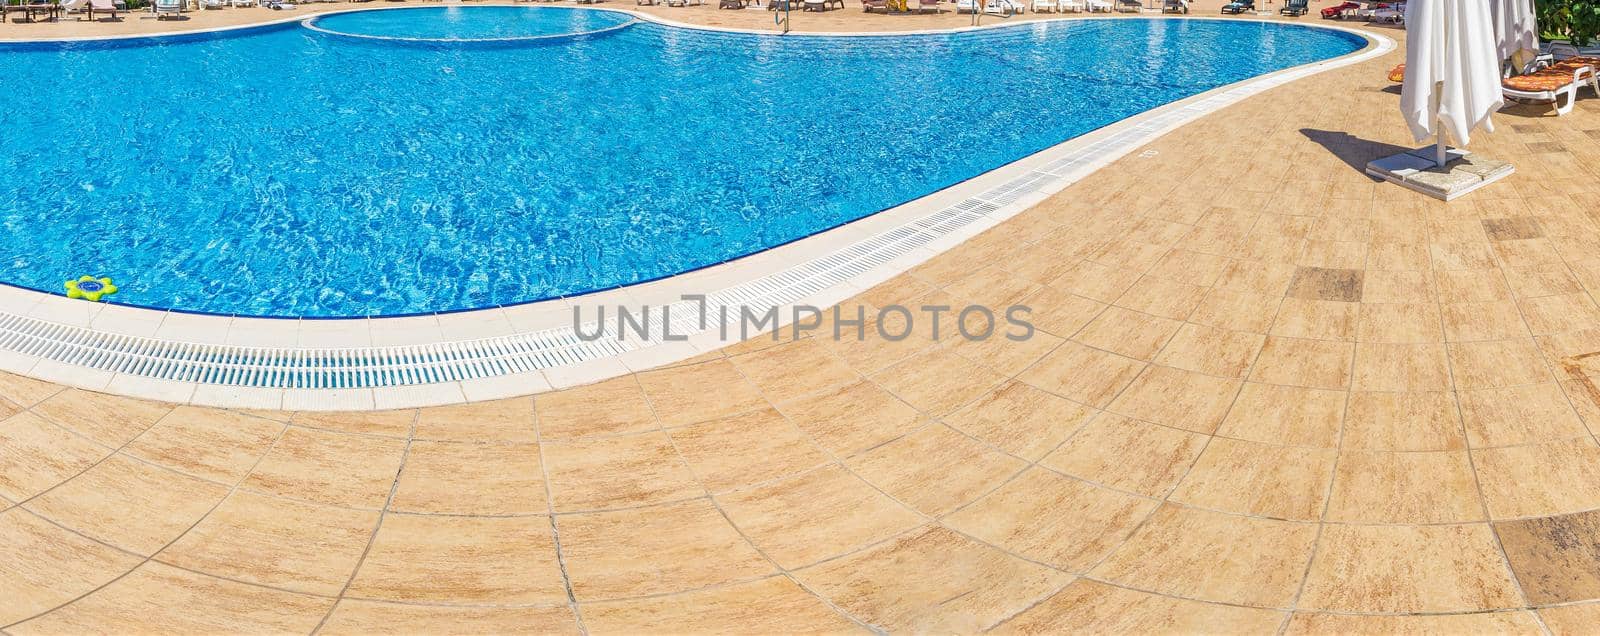 Abstract Pool with blue water background. Top view of swimming pool and floor texture. Panorama of pool bottom with tile pattern and transparent water. Summer travel and vacation background concept by panophotograph